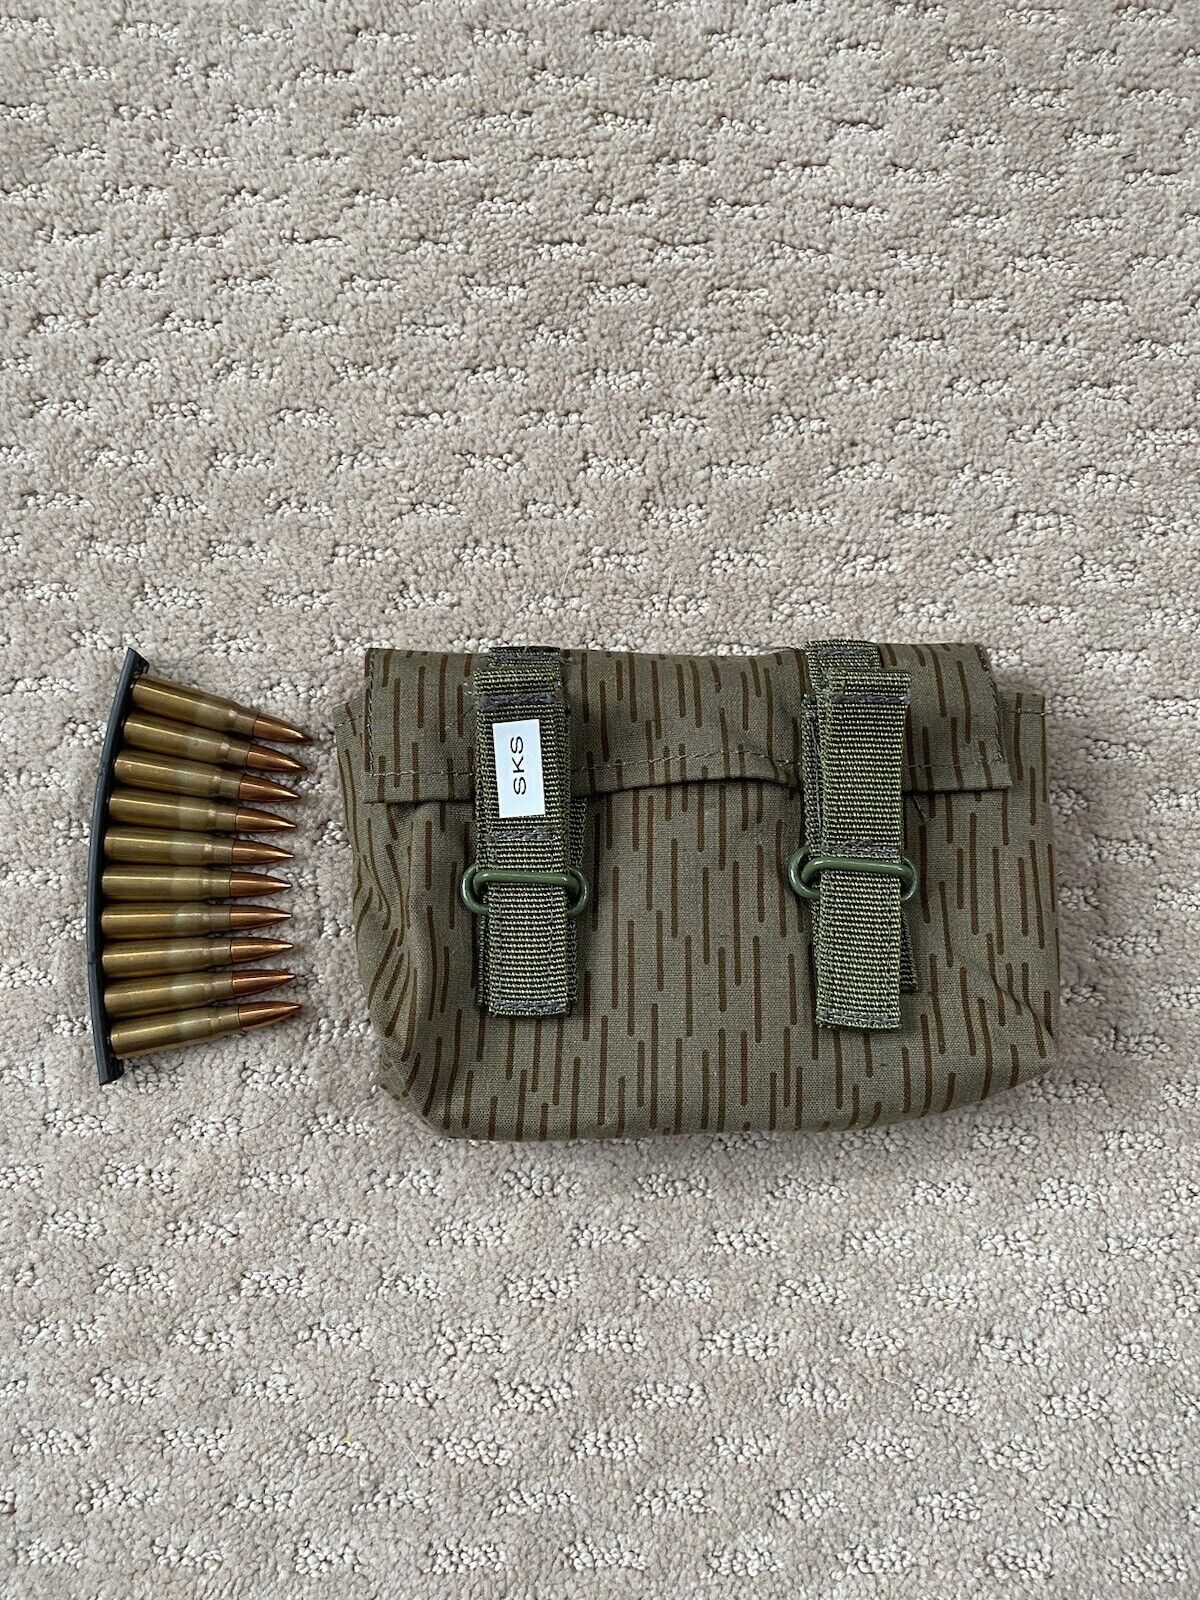 SKS STRIPPER CLIP AMMO POUCH 7.62X39 HOLDS Up To 90 Rounds On 10rd Clips